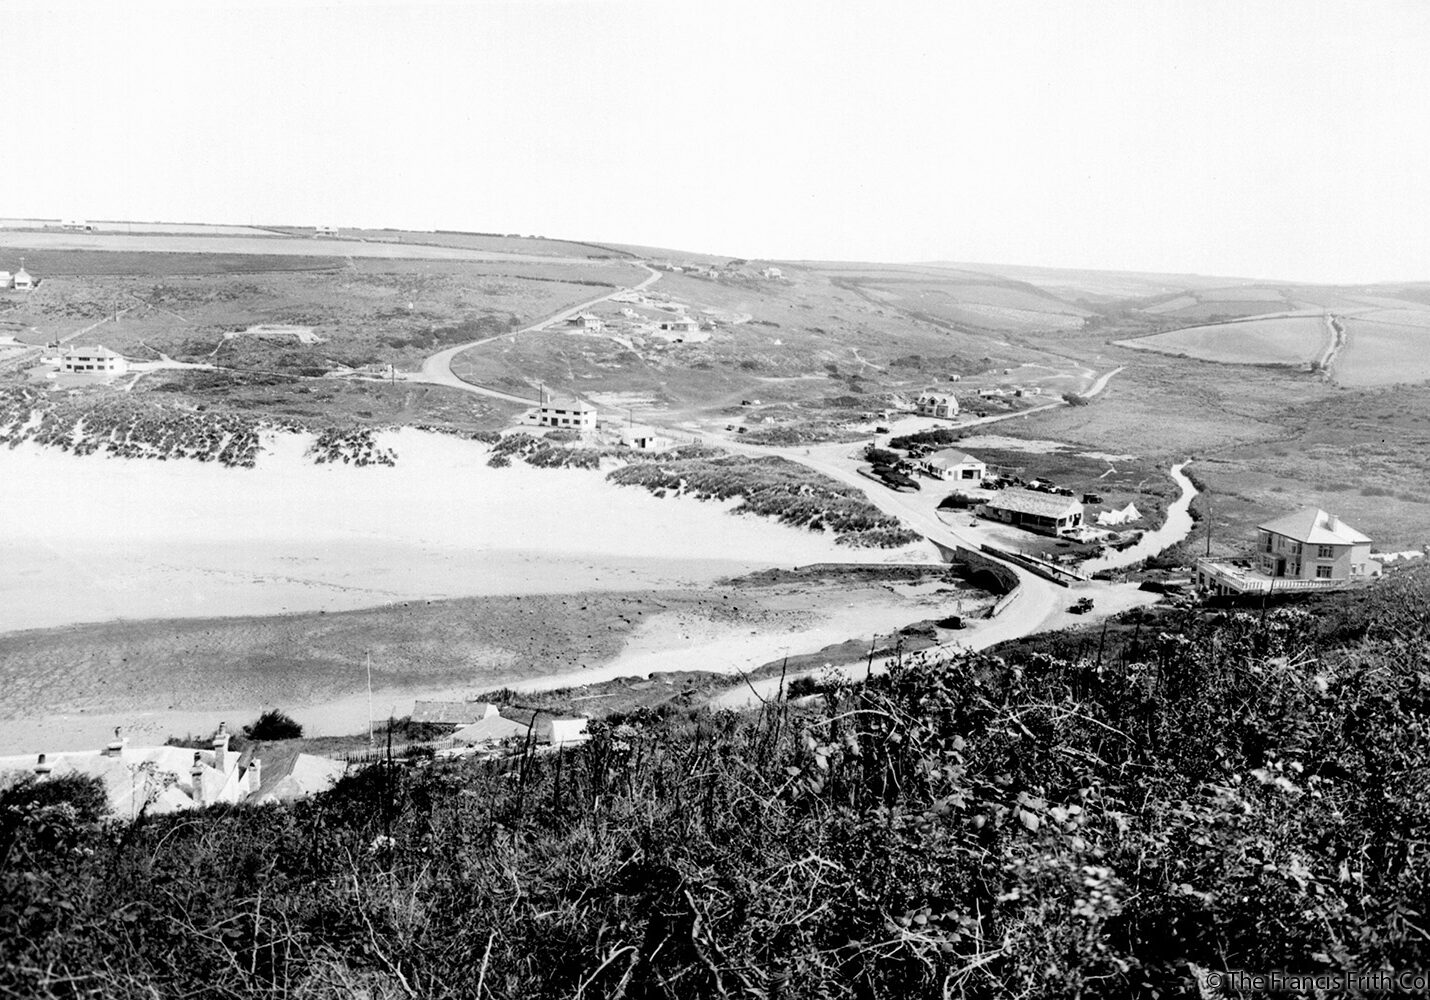 Mawgan Porth from southern cliffs,1935. Image courtesy of the Francis Frith collection.